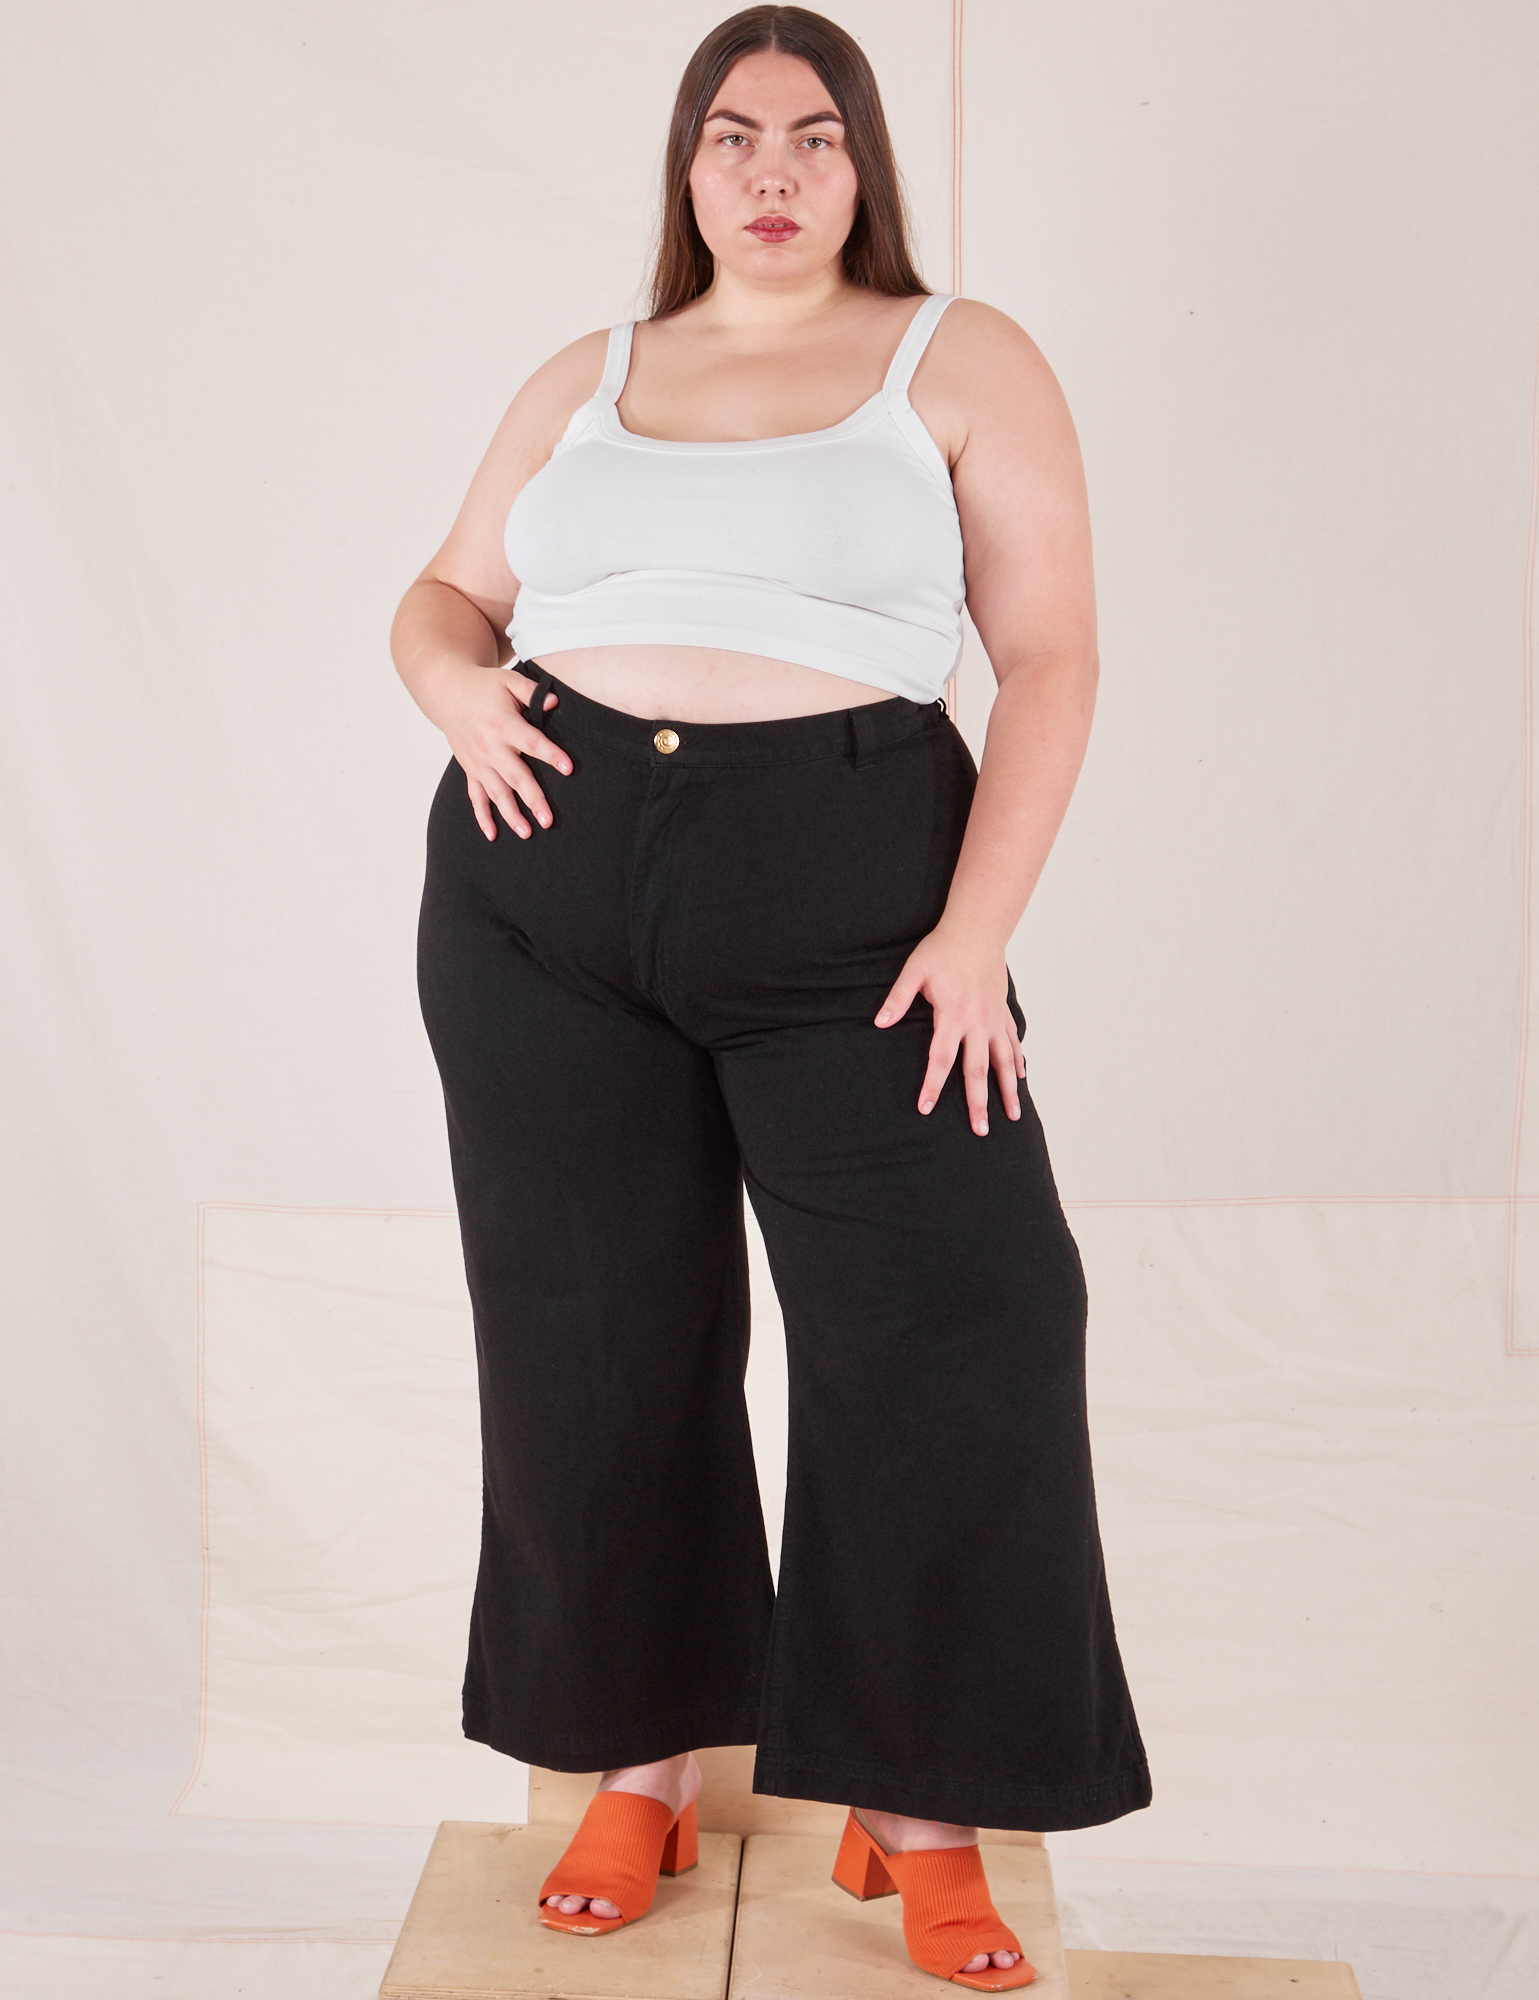 Marielena is 5&#39;8&quot; and wearing 2XL Bell Bottoms in Basic Black paired with vintage off-white Cami